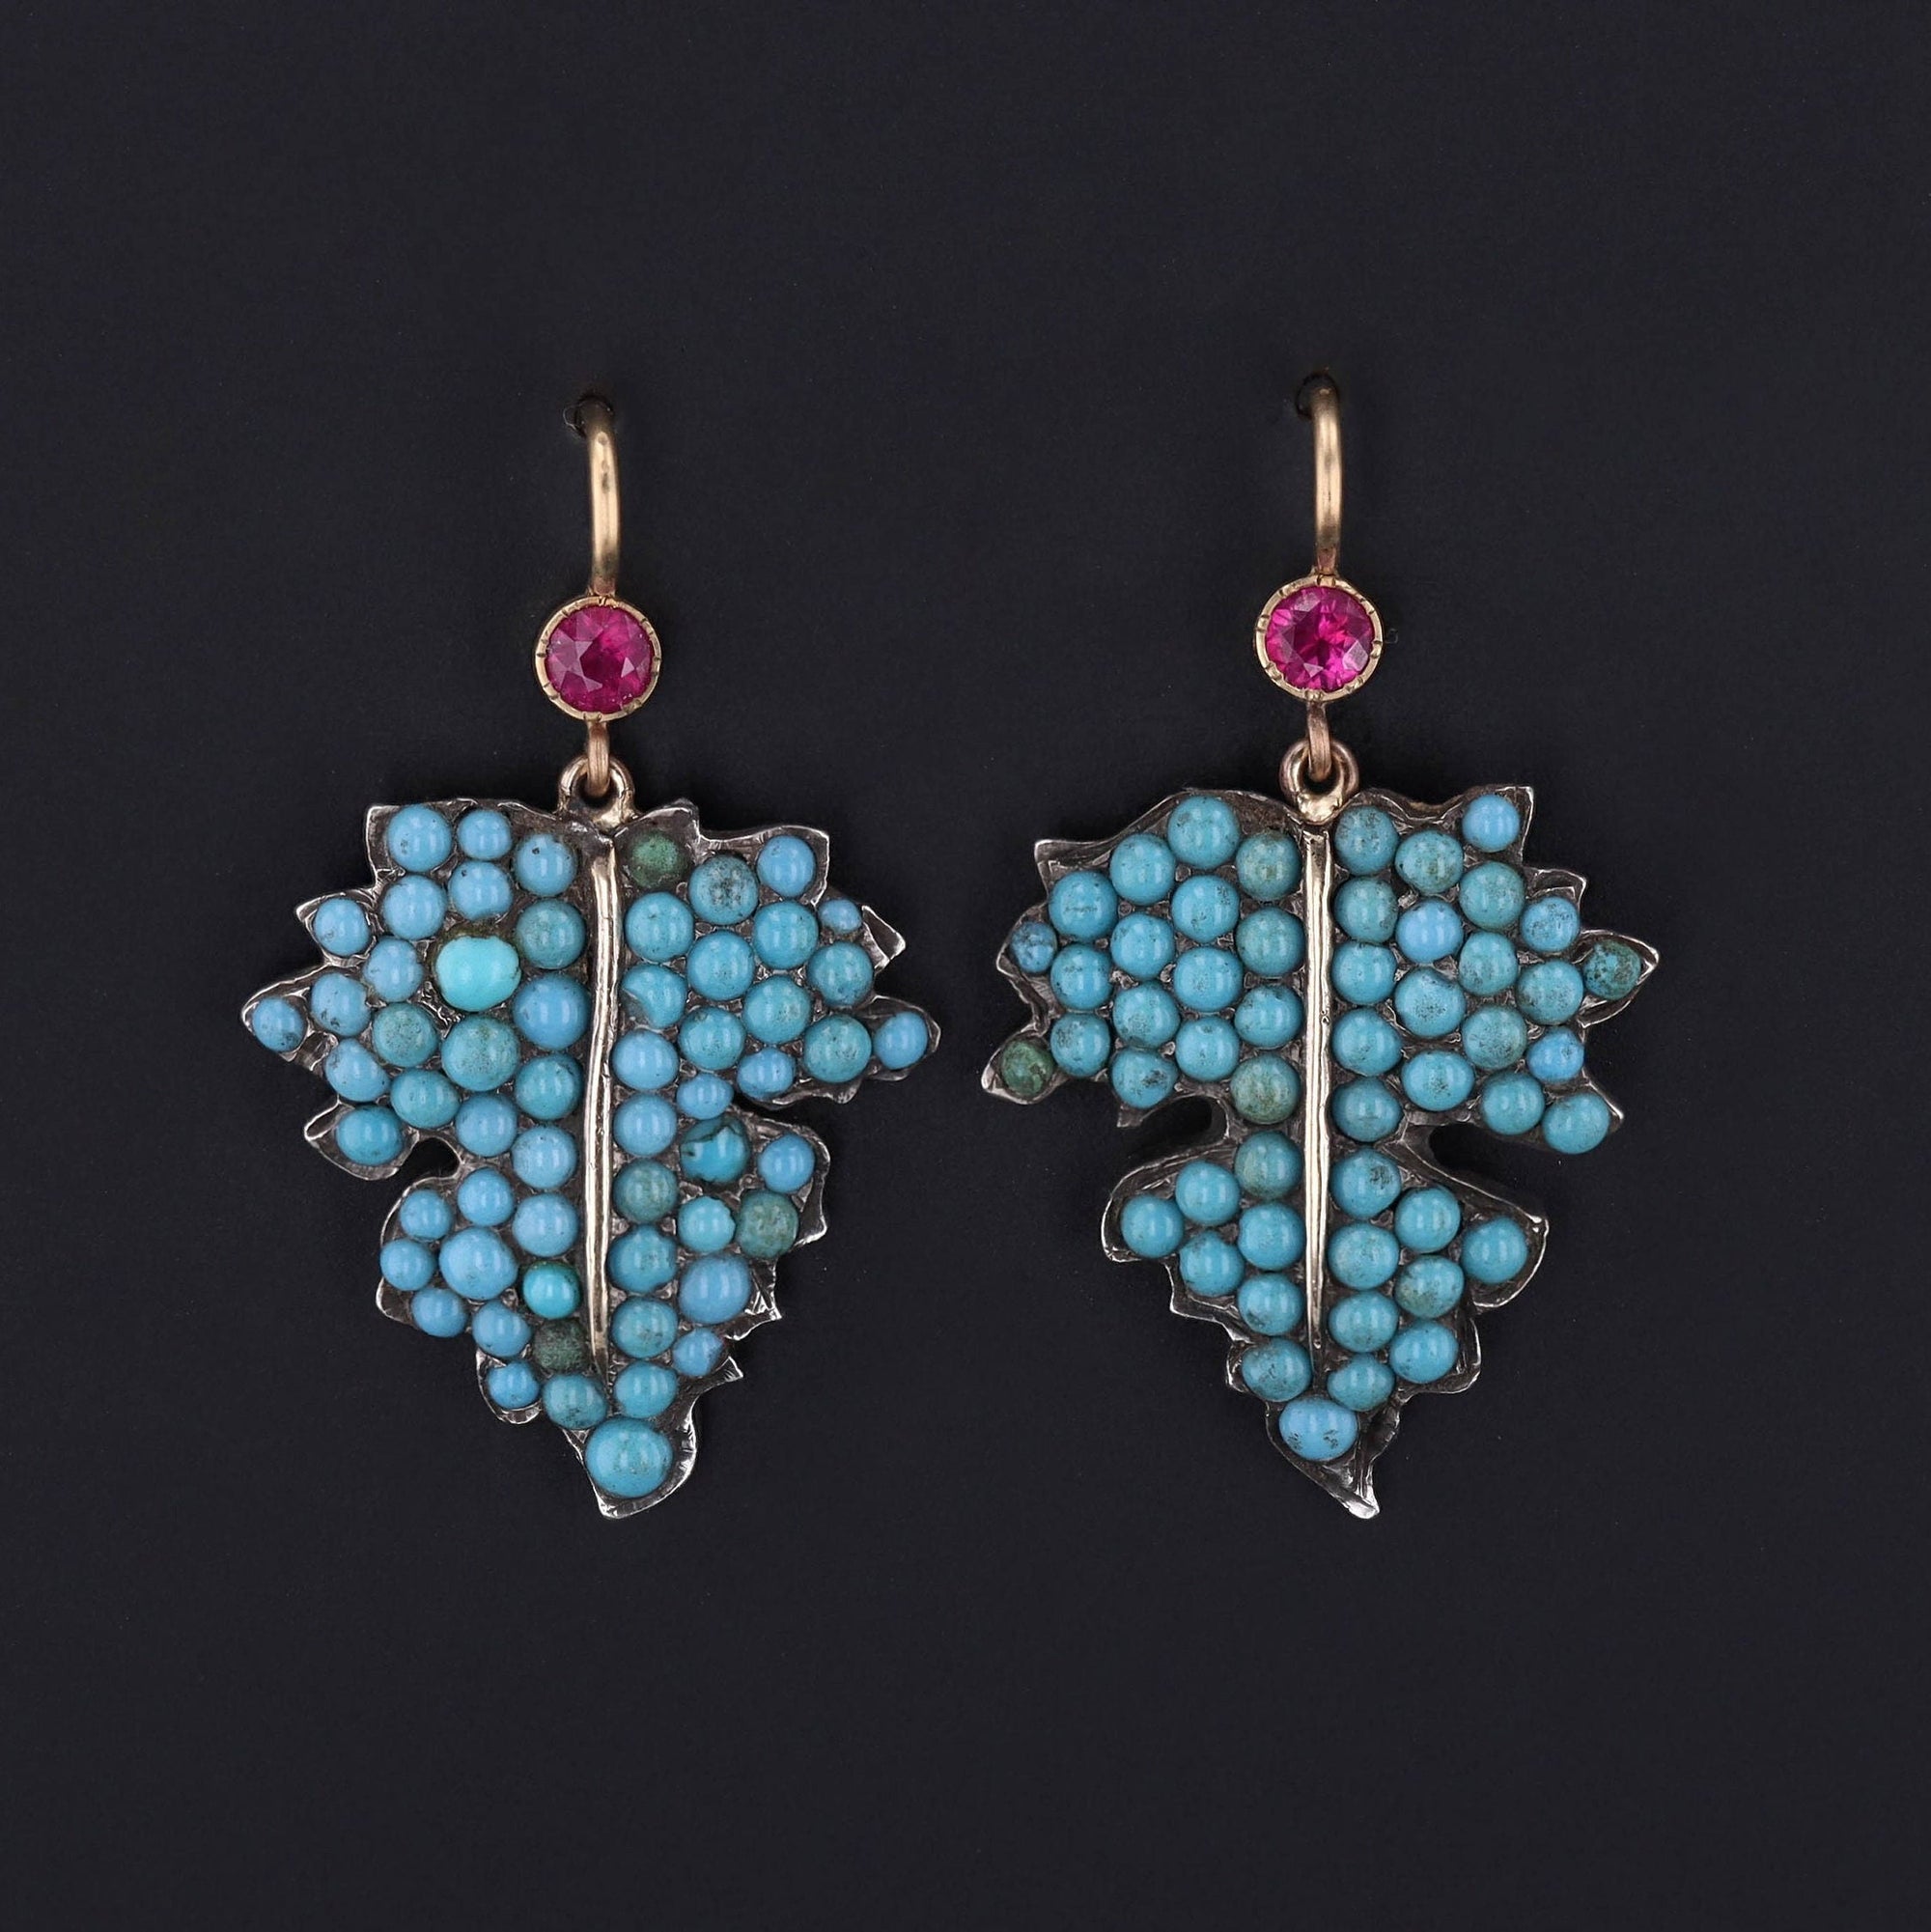 Antique Turquoise Leaf Earrings with Ruby Accents | Turquoise Earrings 